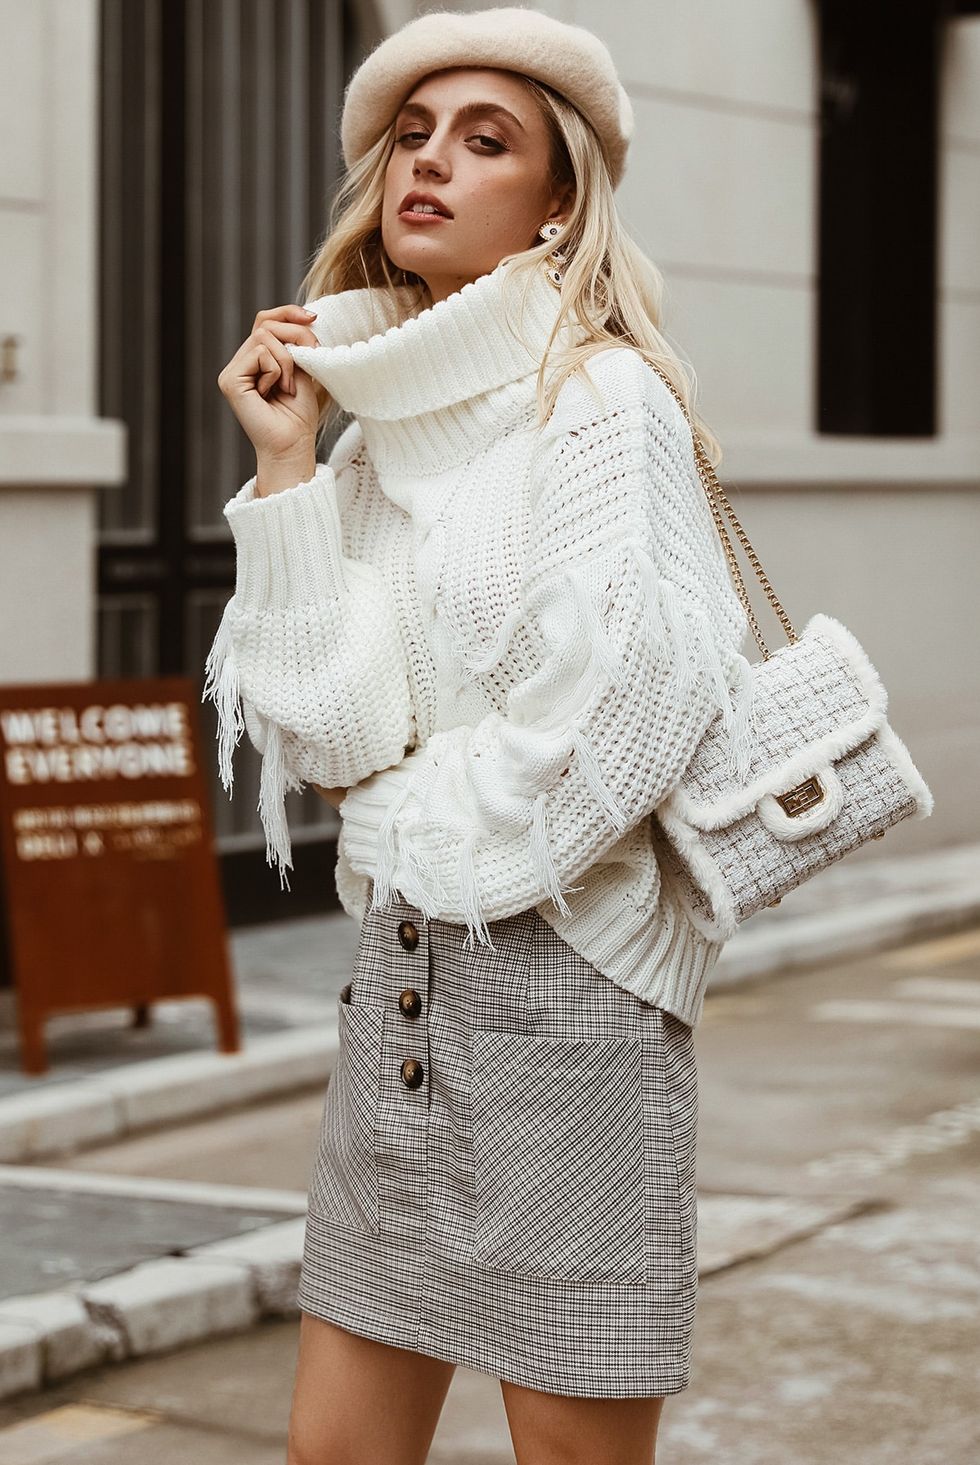 Winter White  Mode, Winter mode outfits, Winter stijl